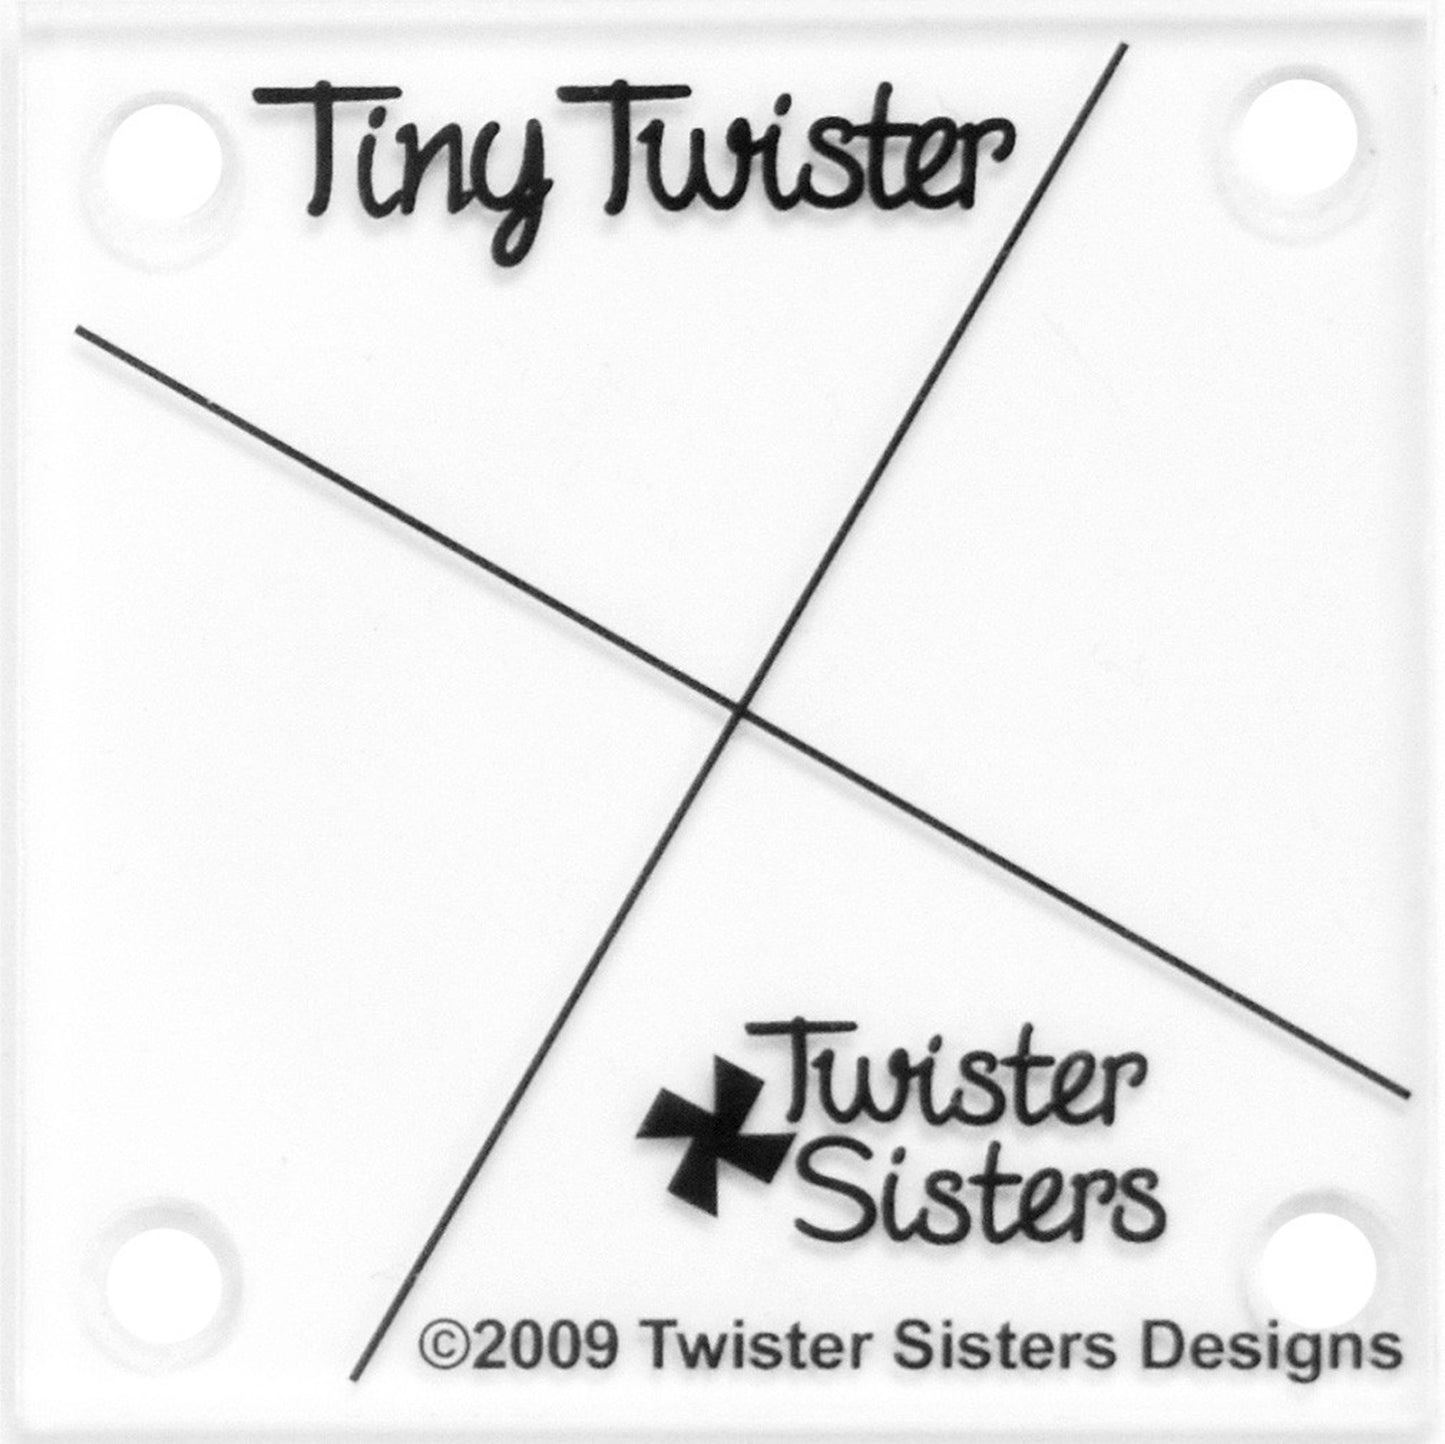 Tiny Twister Tool for 3.5" Inch Squares, Twister Sisters TINYTW35, Quilter's Twister Template, Scrap Treat Squares Friendly